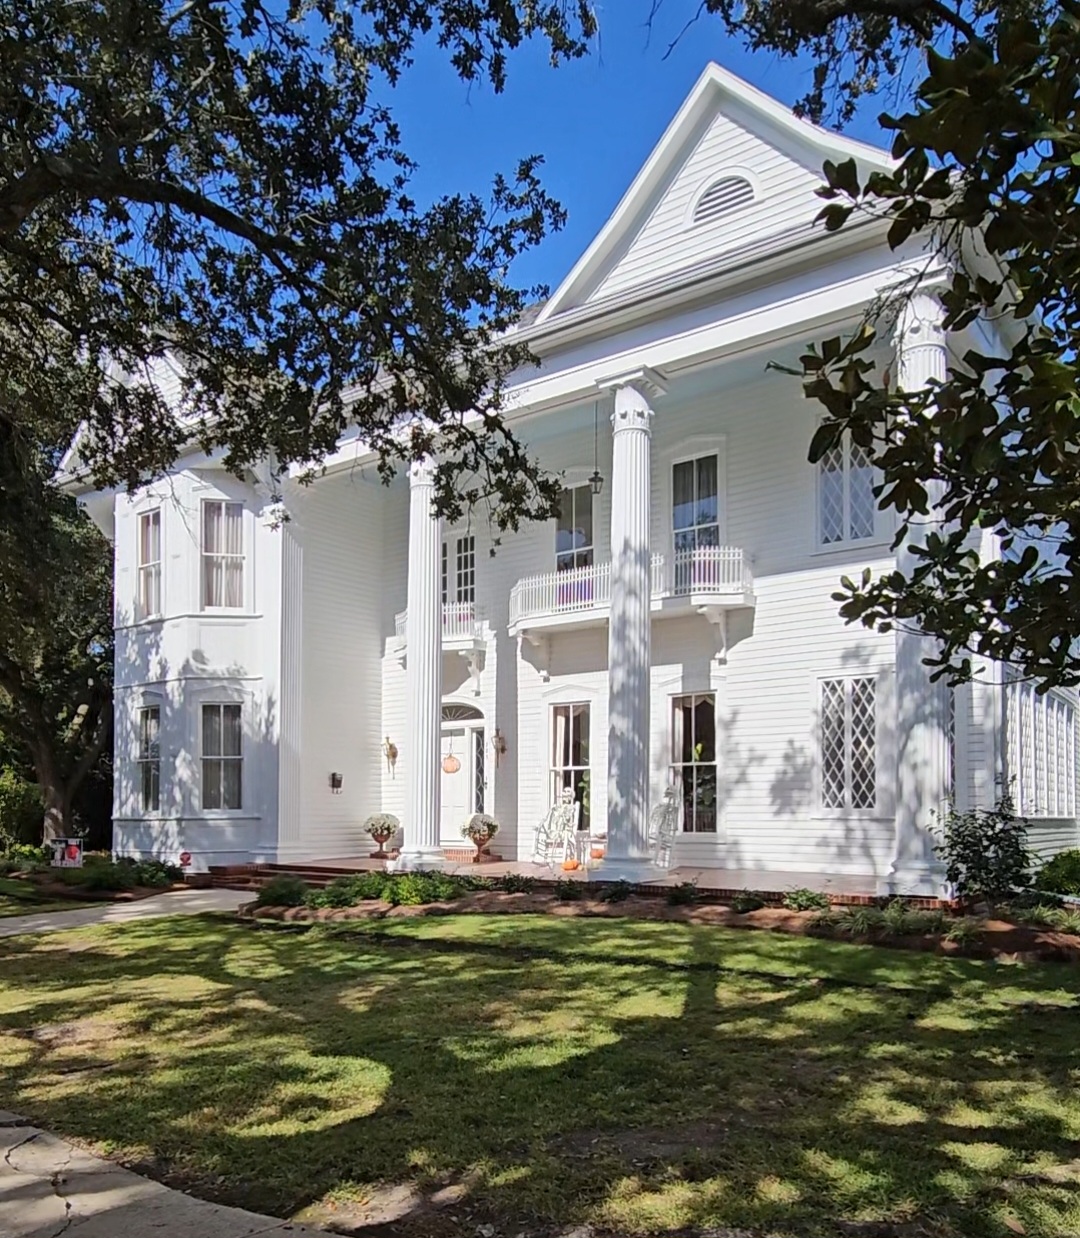 Wood Restoration and Painting in 130 Year Old Governors Mansion in Crowley, LA Thumbnail